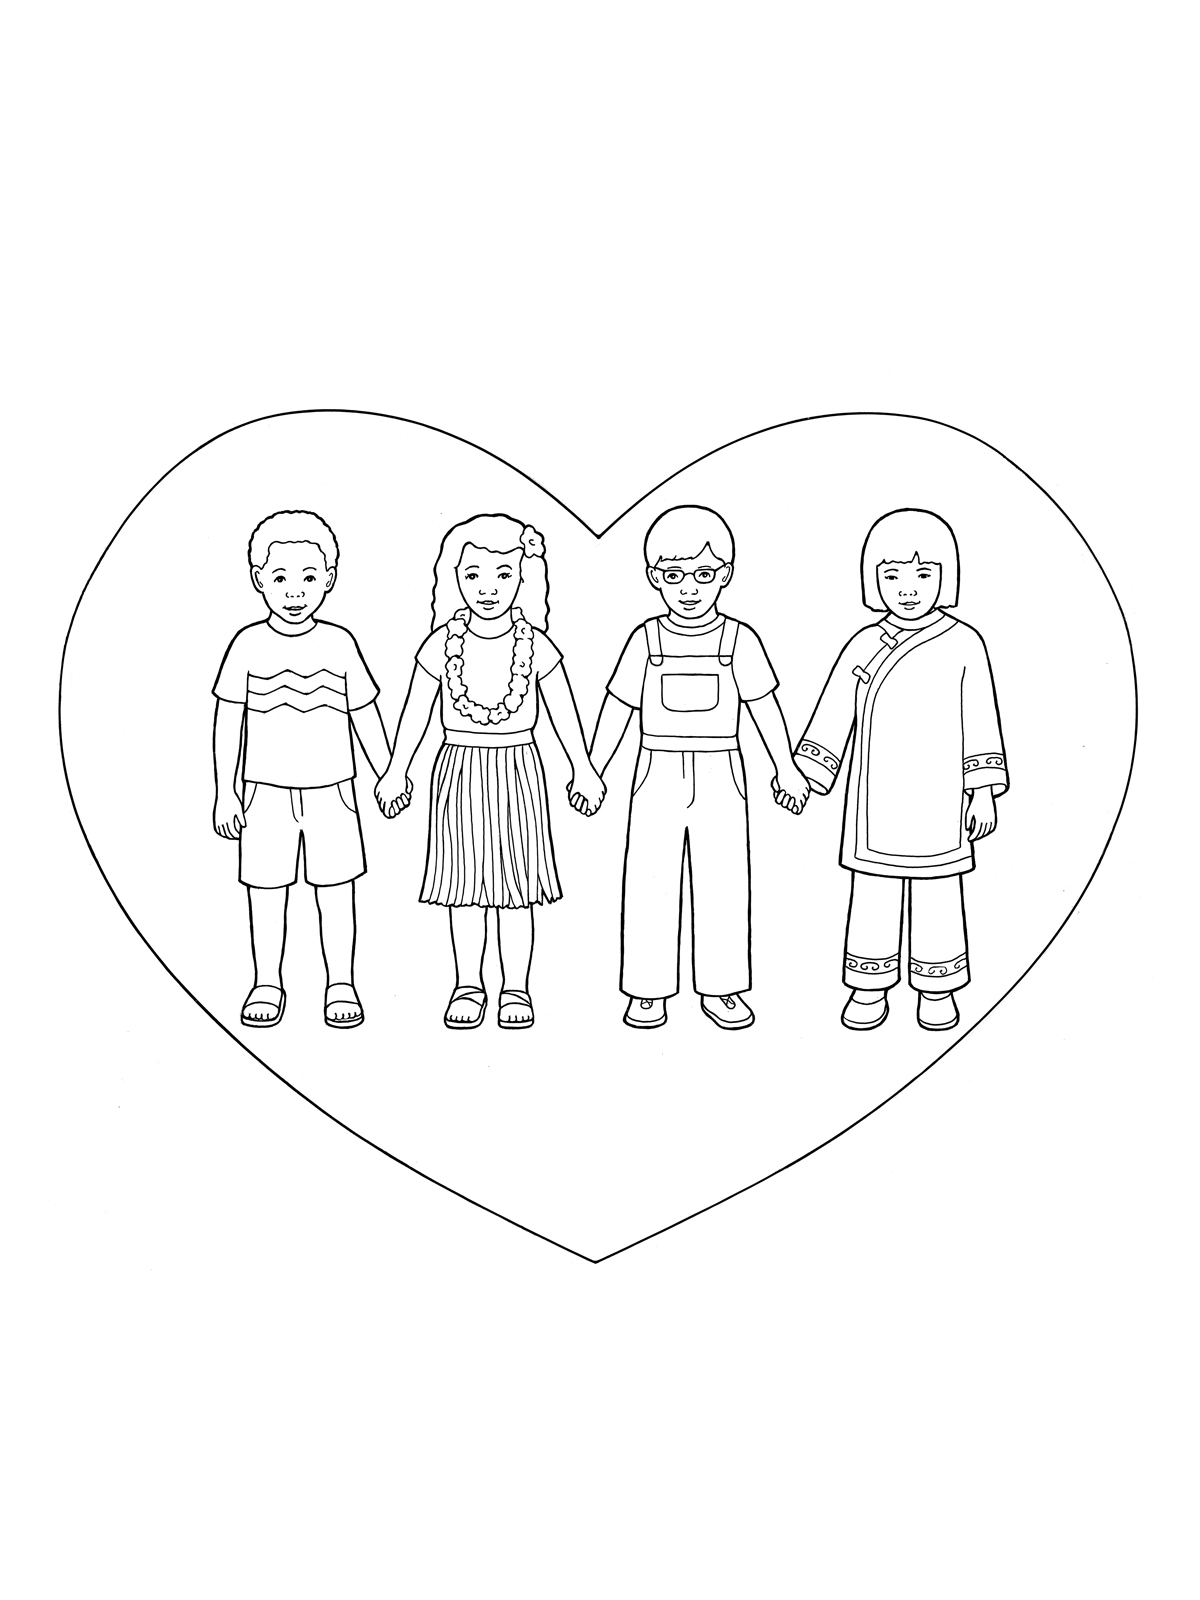 Holding Hands Coloring Pages at GetColorings.com | Free printable